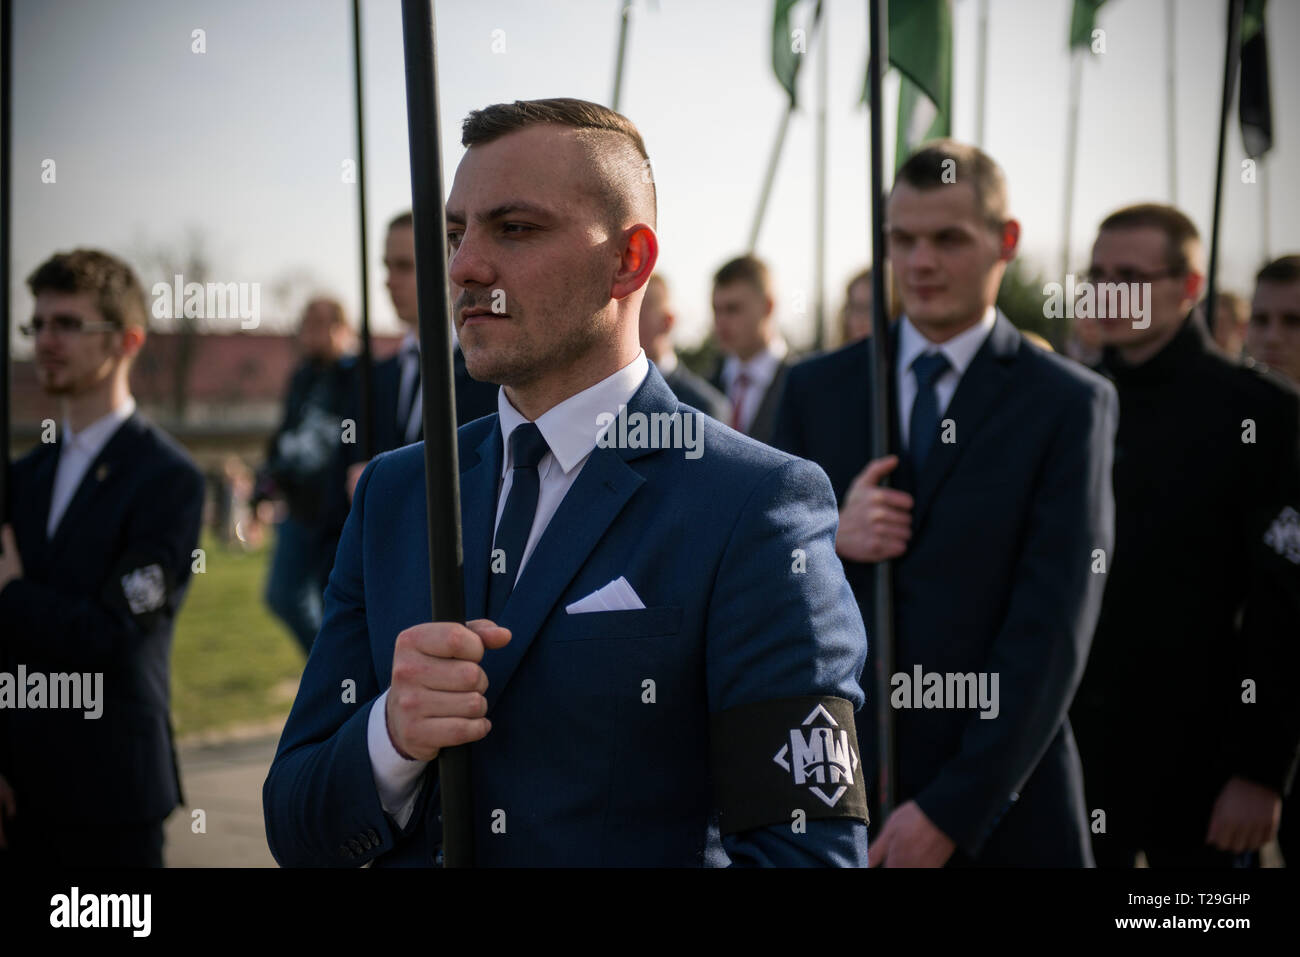 A nationalist with the All-Polish Youth arm band is seen standing in a formation during the pilgrimage. The 6th Pilgrimage of Nationalists at the Jasna Gora monastery organized by the All-Polish Youth (Mlodziez Wszechpolska). This pilgrimage is under the patronage of the Pozna? Five, meaning five young boys who gave their lives for God and for their homeland. Stock Photo